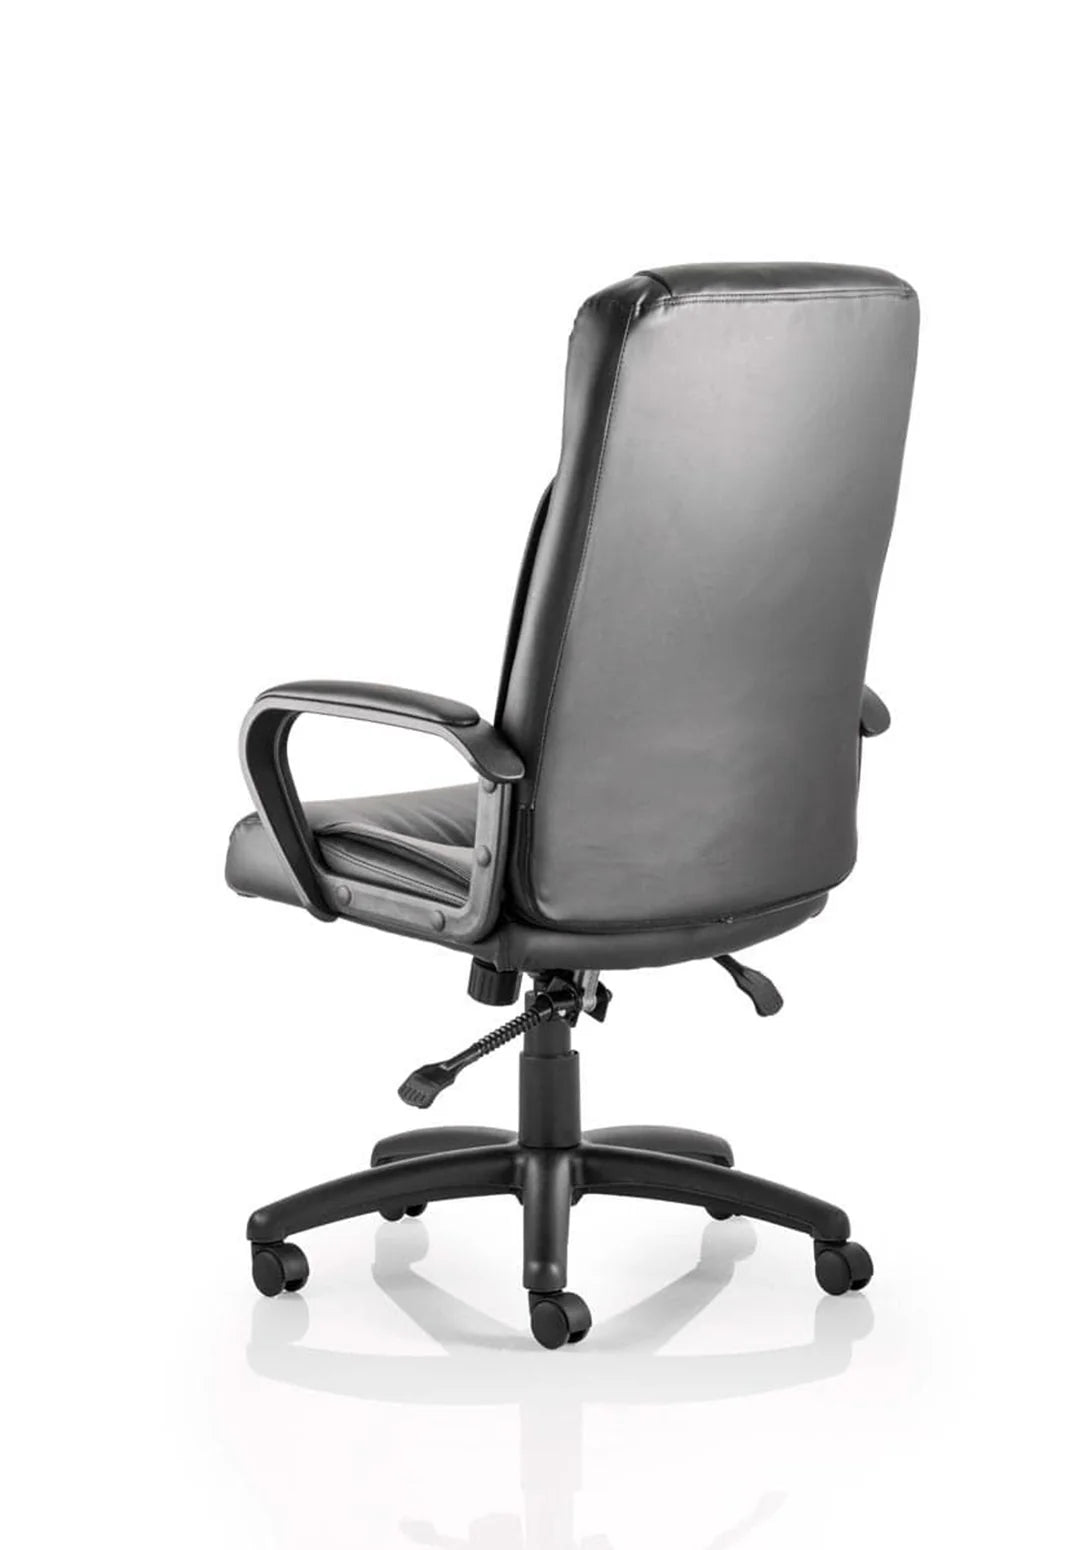 Plaza High Back Executive Black Leather Office Chair with Arms